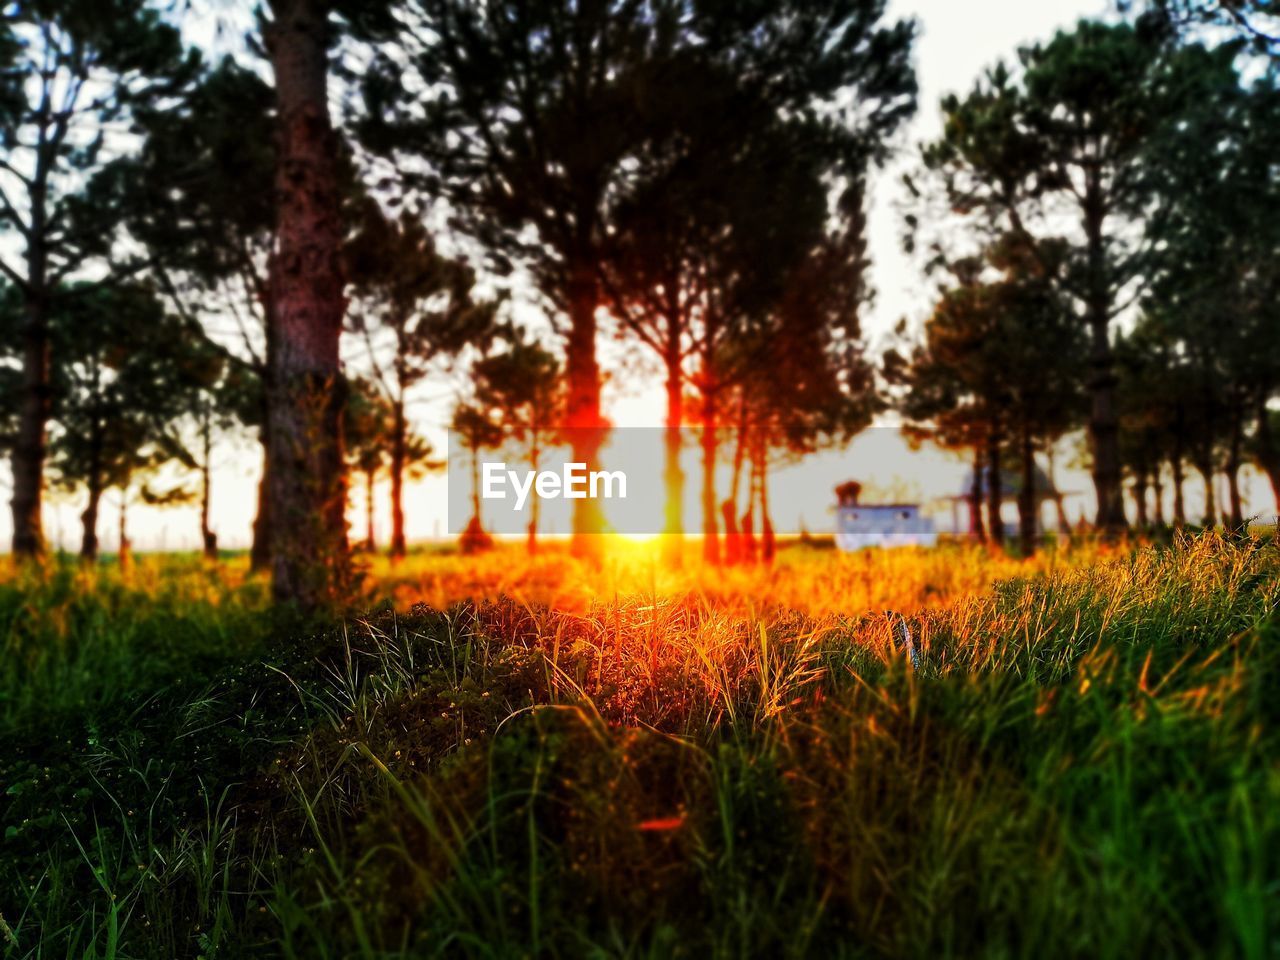 plant, tree, nature, grass, land, growth, field, beauty in nature, sky, tranquility, sunset, sunlight, tranquil scene, landscape, autumn, scenics - nature, no people, environment, leaf, green, outdoors, idyllic, sun, orange color, non-urban scene, forest, day, evening